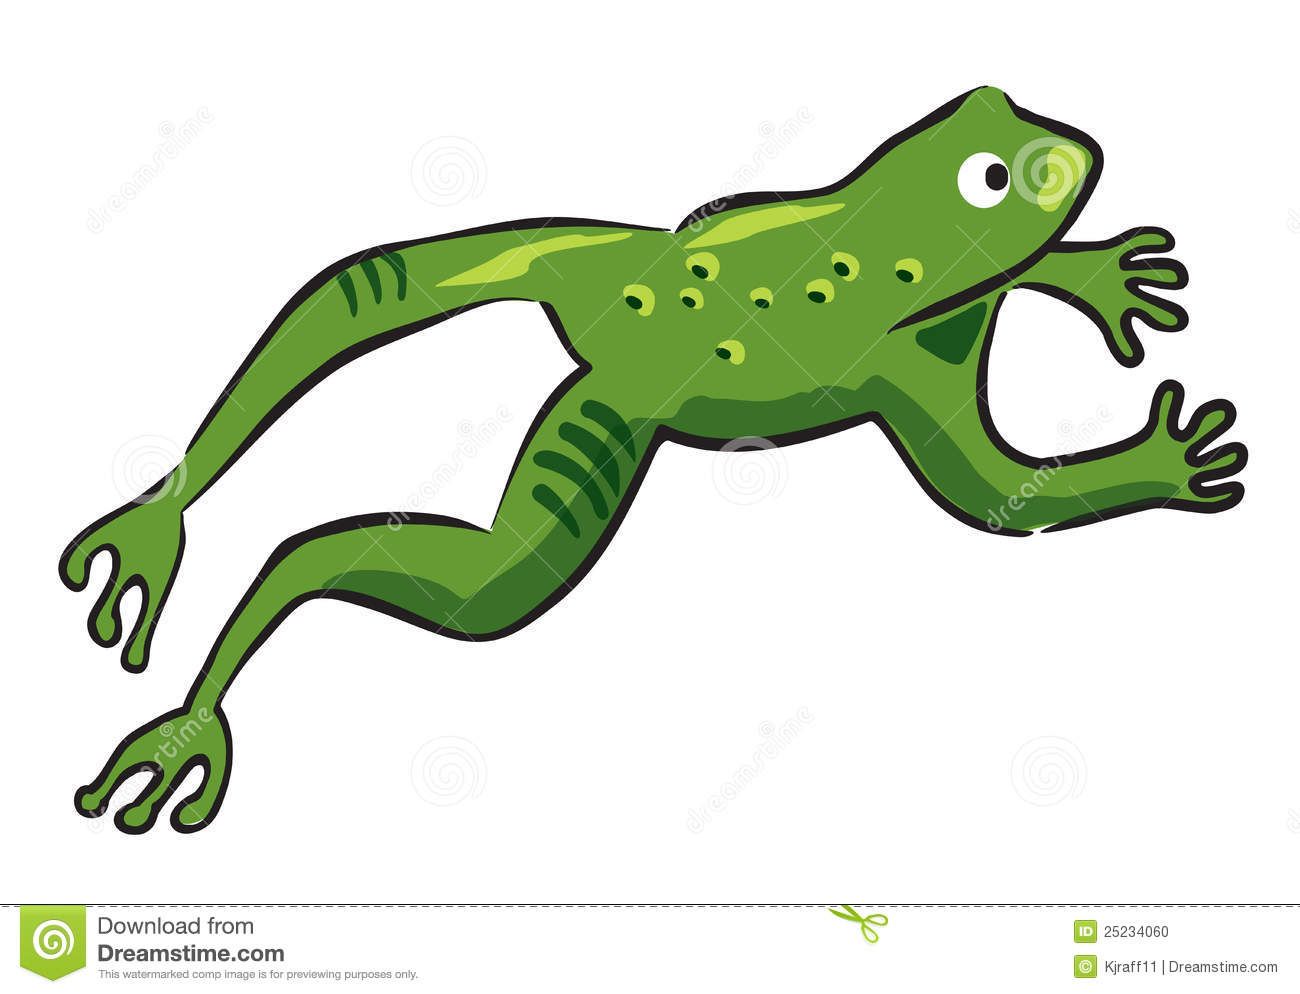 Jumping frog clip art. Toad clipart jumps